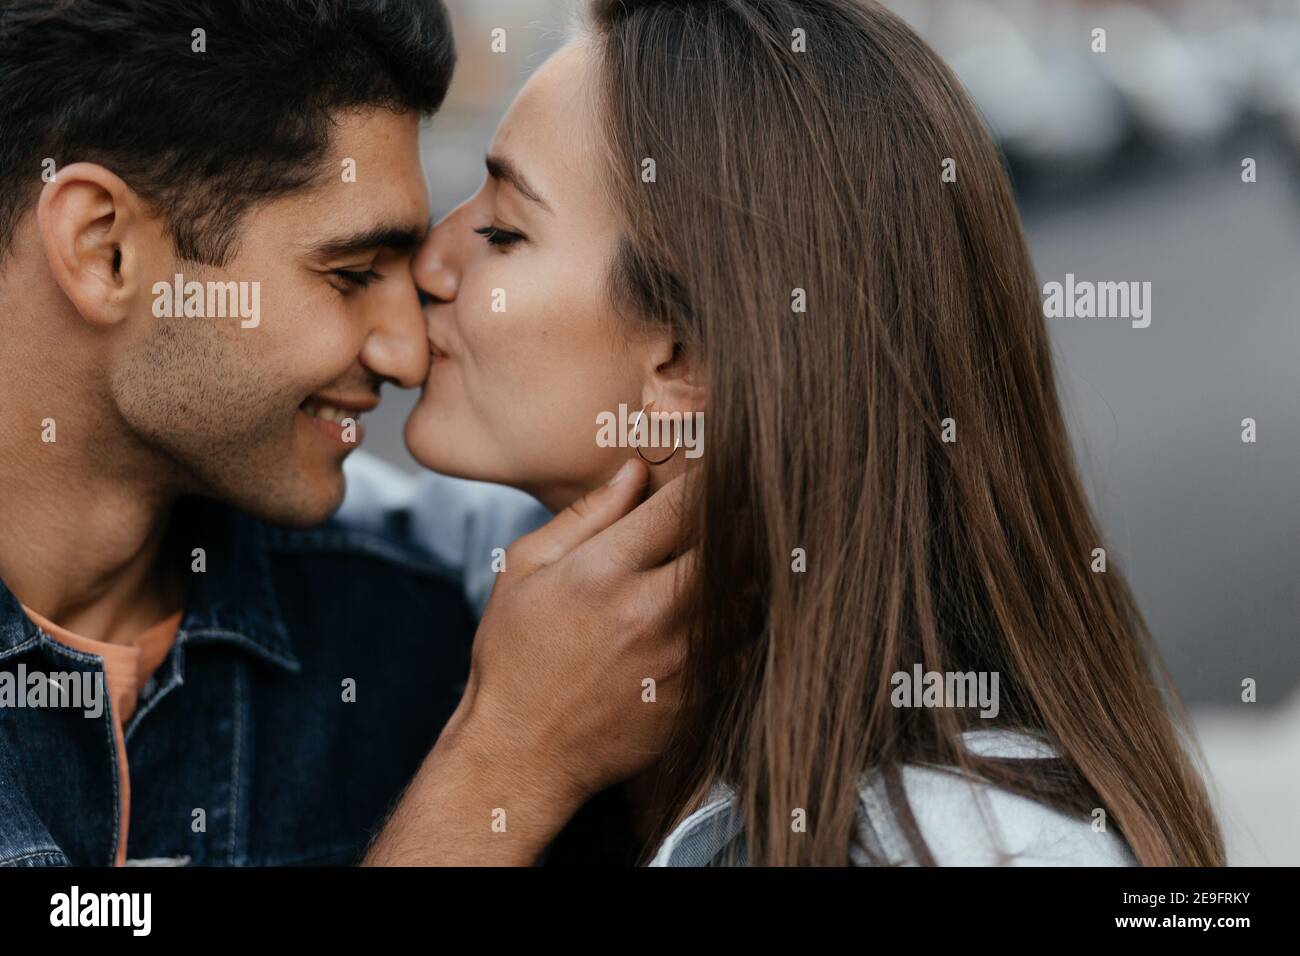 Young beautiful girl kissing his boyfriend's nose. Couple in love in the city. Urban lovestory Stock Photo